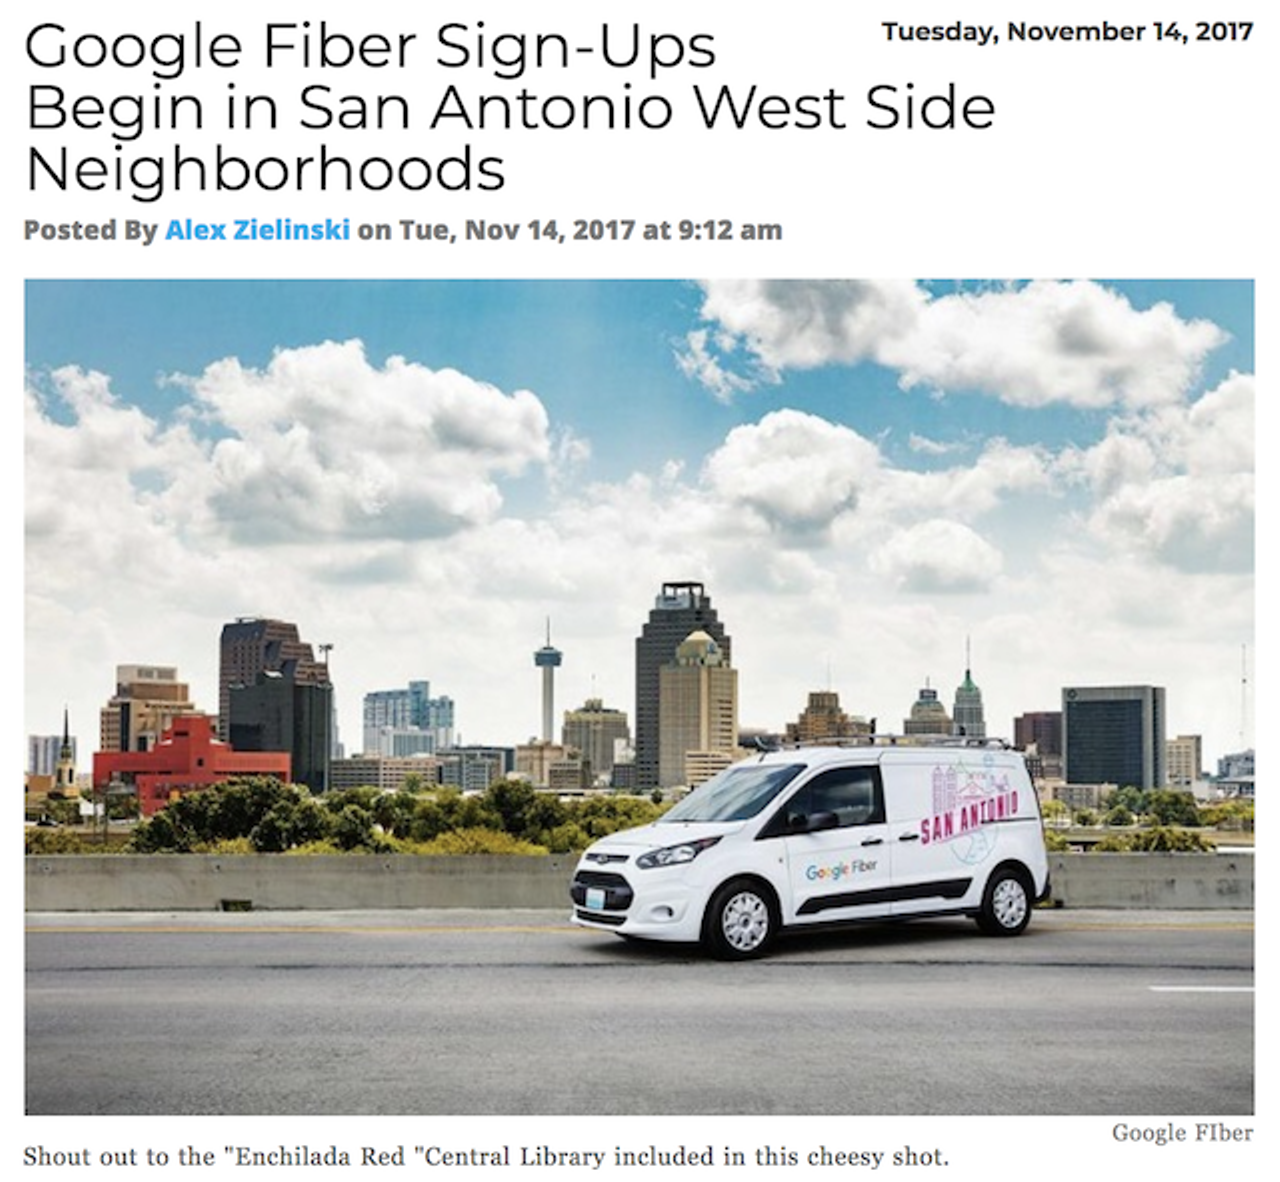 Google Fiber is here! Even though it’s limited to a few San Antonio residents at the moment, this breakthrough Internet service could change the technological landscape in our city. Read more.